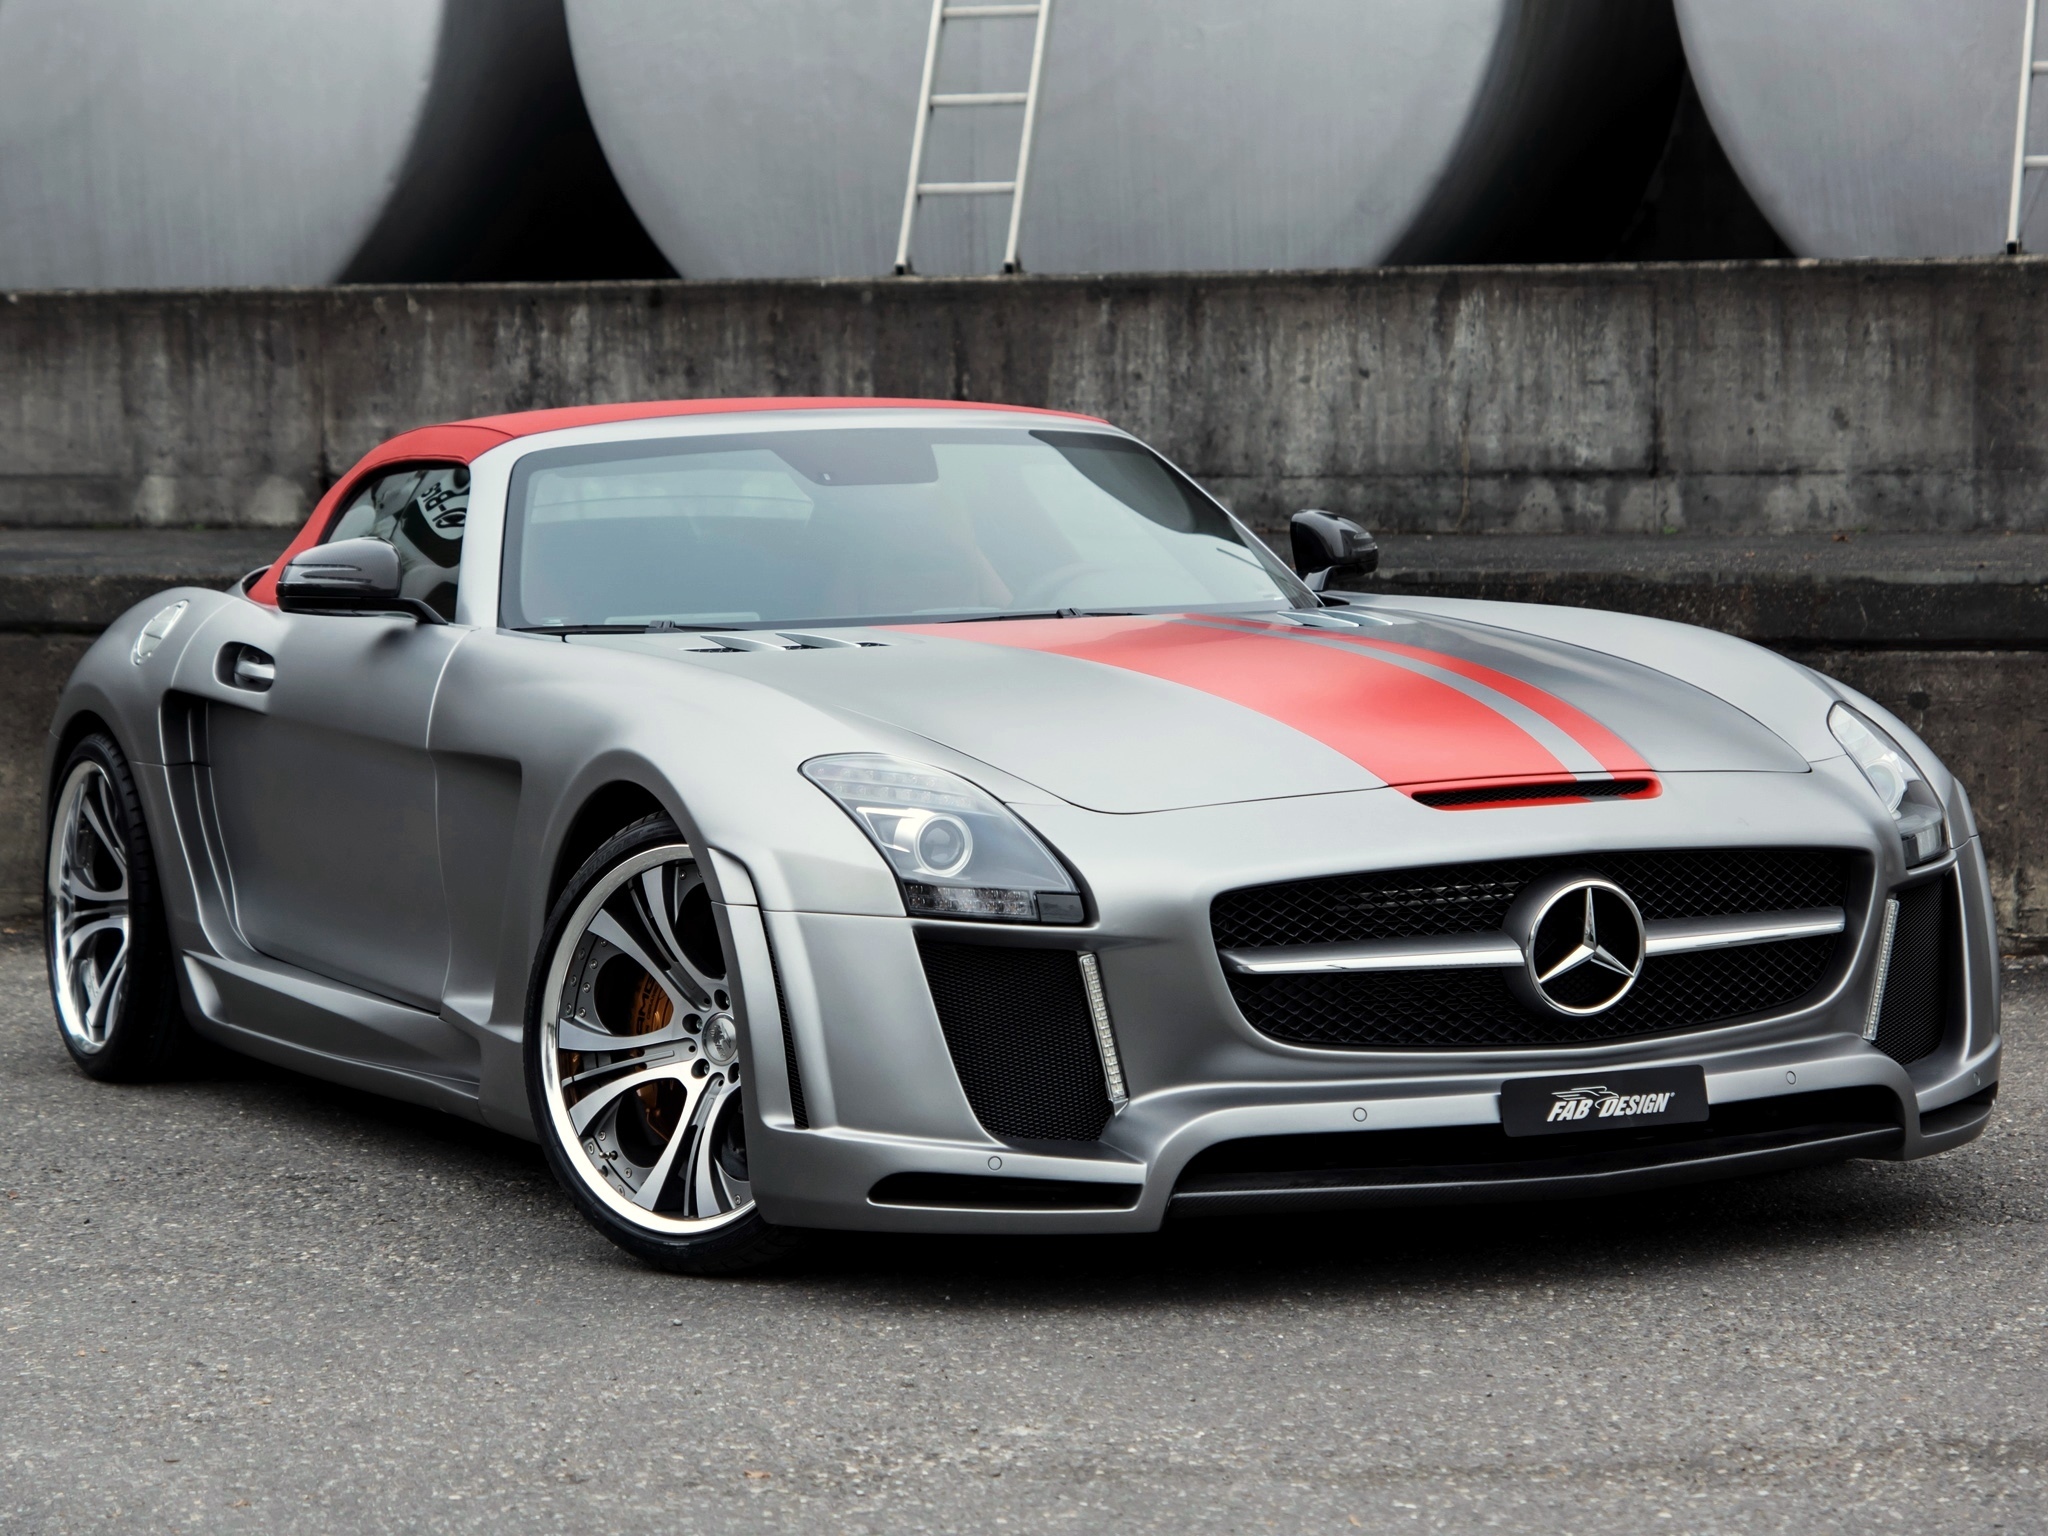 83510 download wallpaper cars, side view, amg, mercedes-benz, silver, silvery, sls 63 screensavers and pictures for free